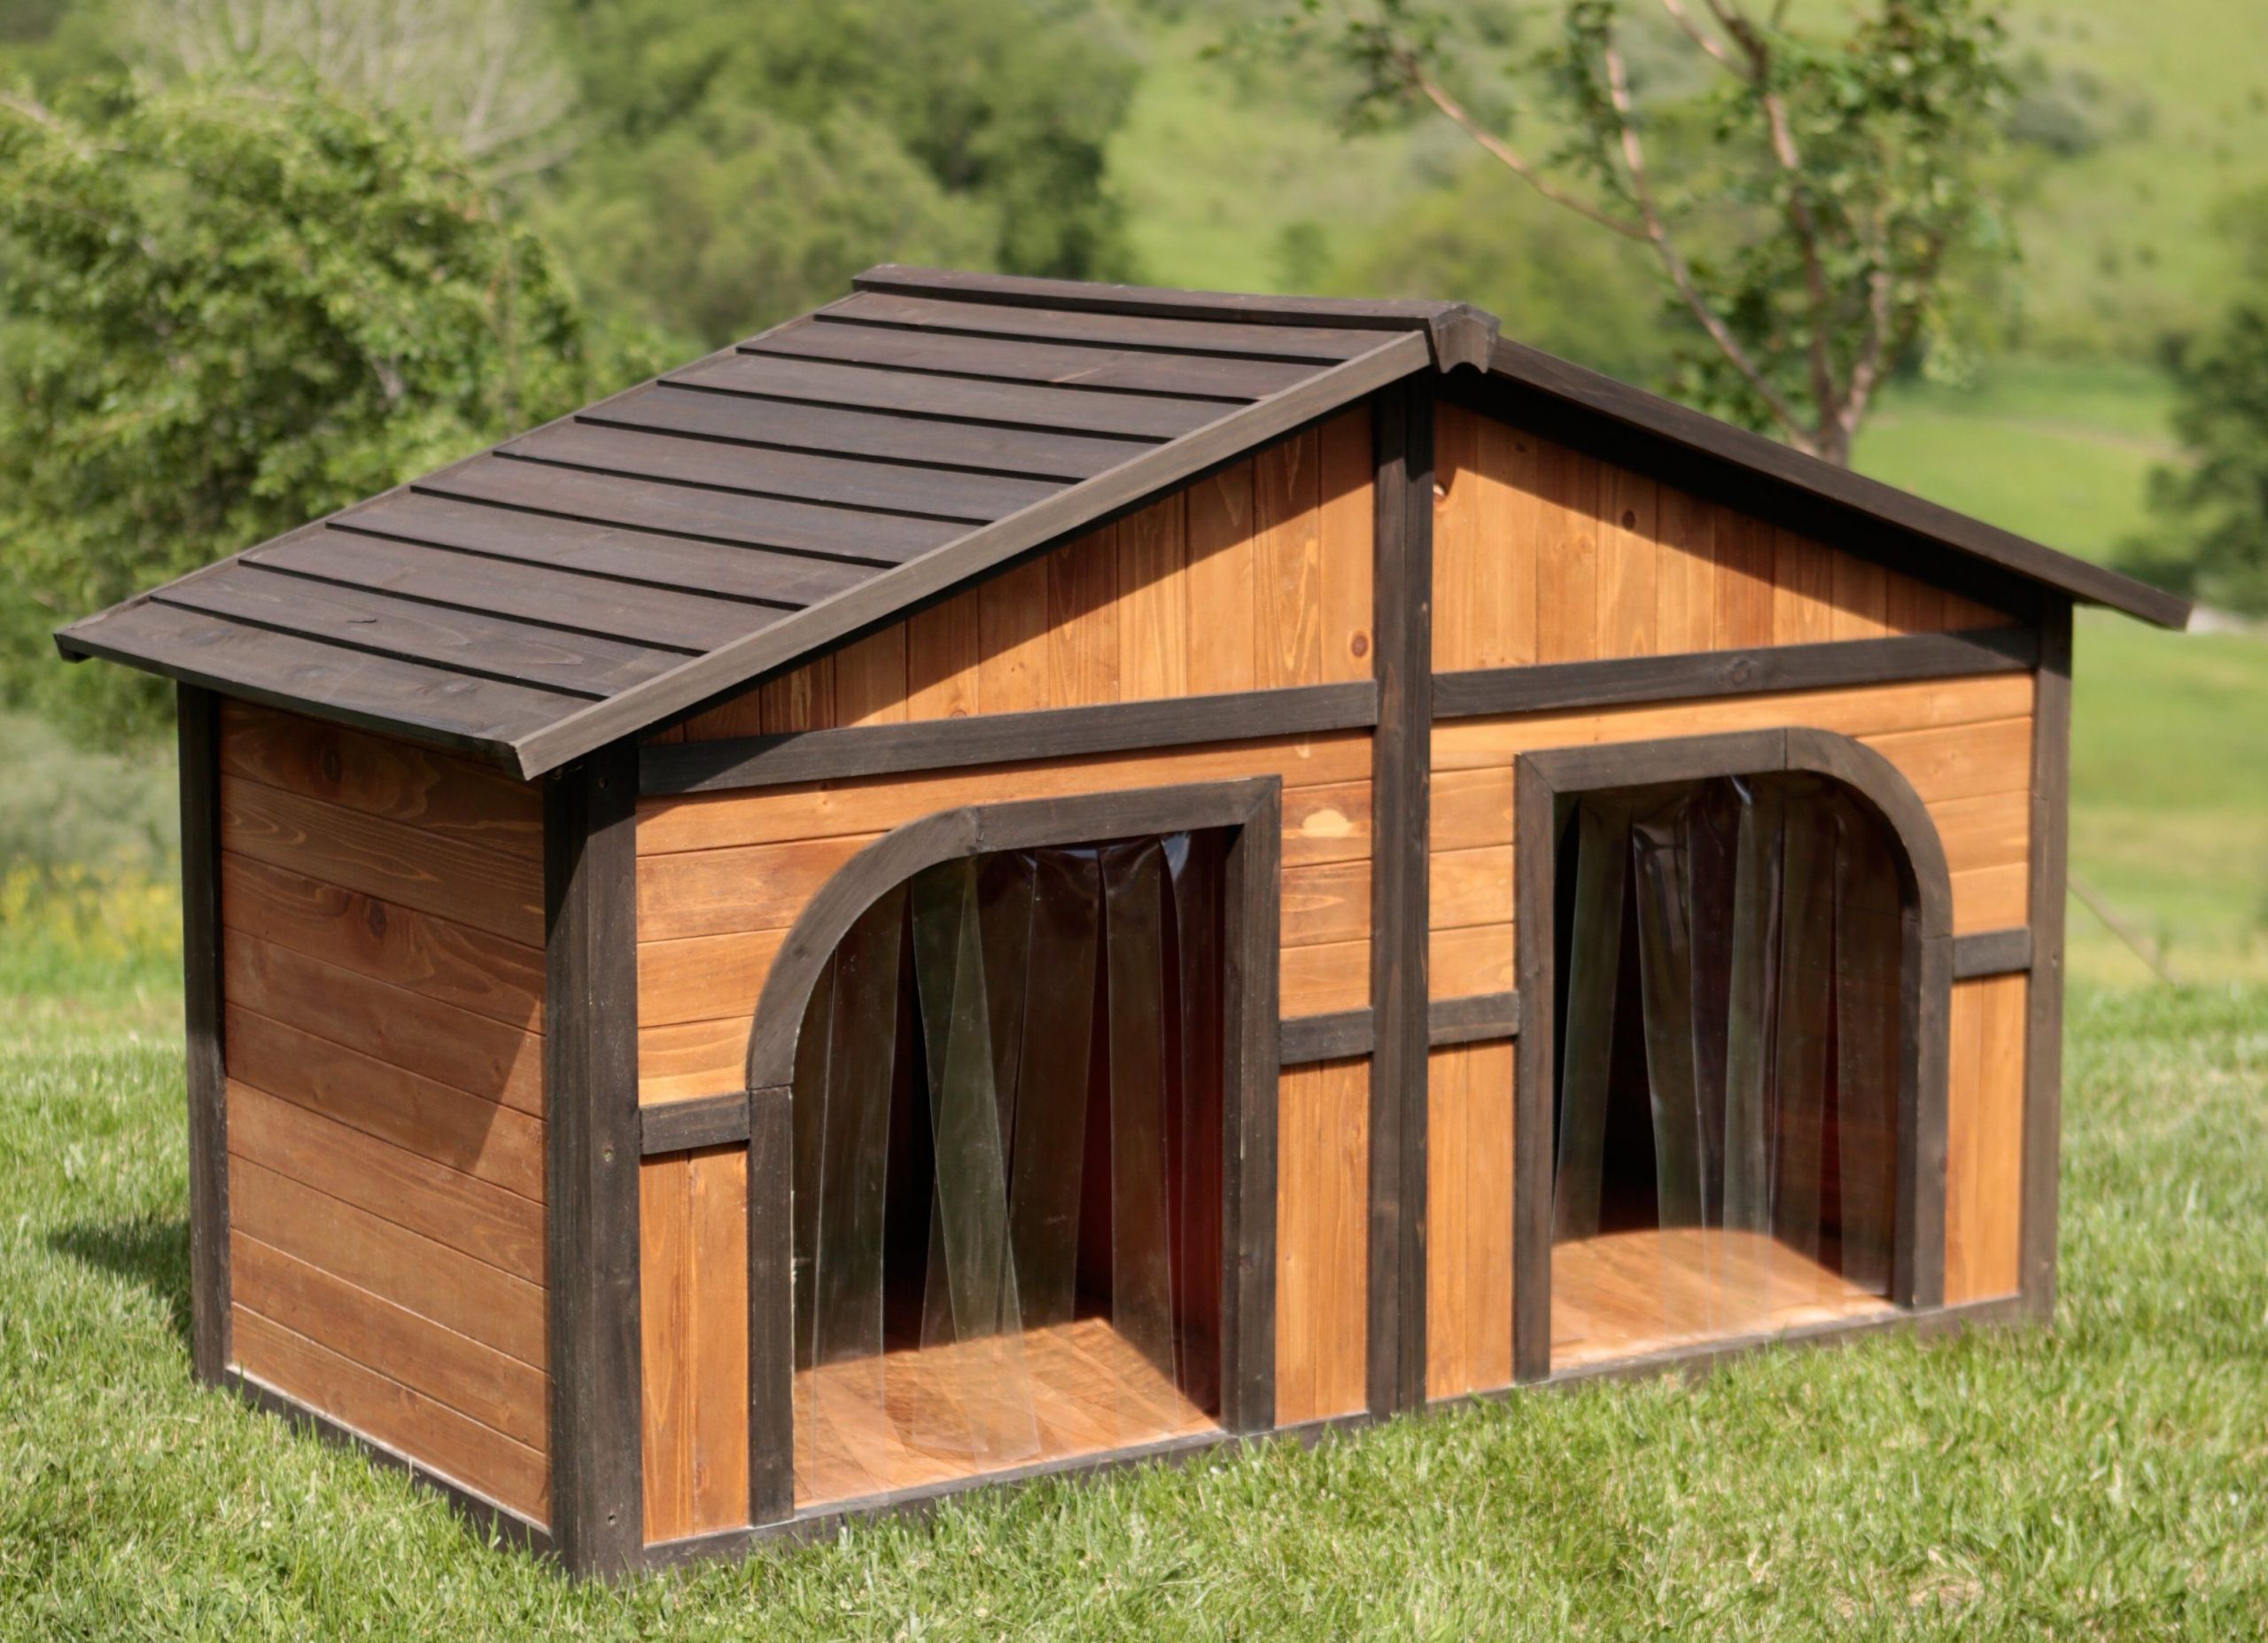 DIY Dog House Plans For Large
 10 Simple But Beautiful DIY Dog House Designs That You Can